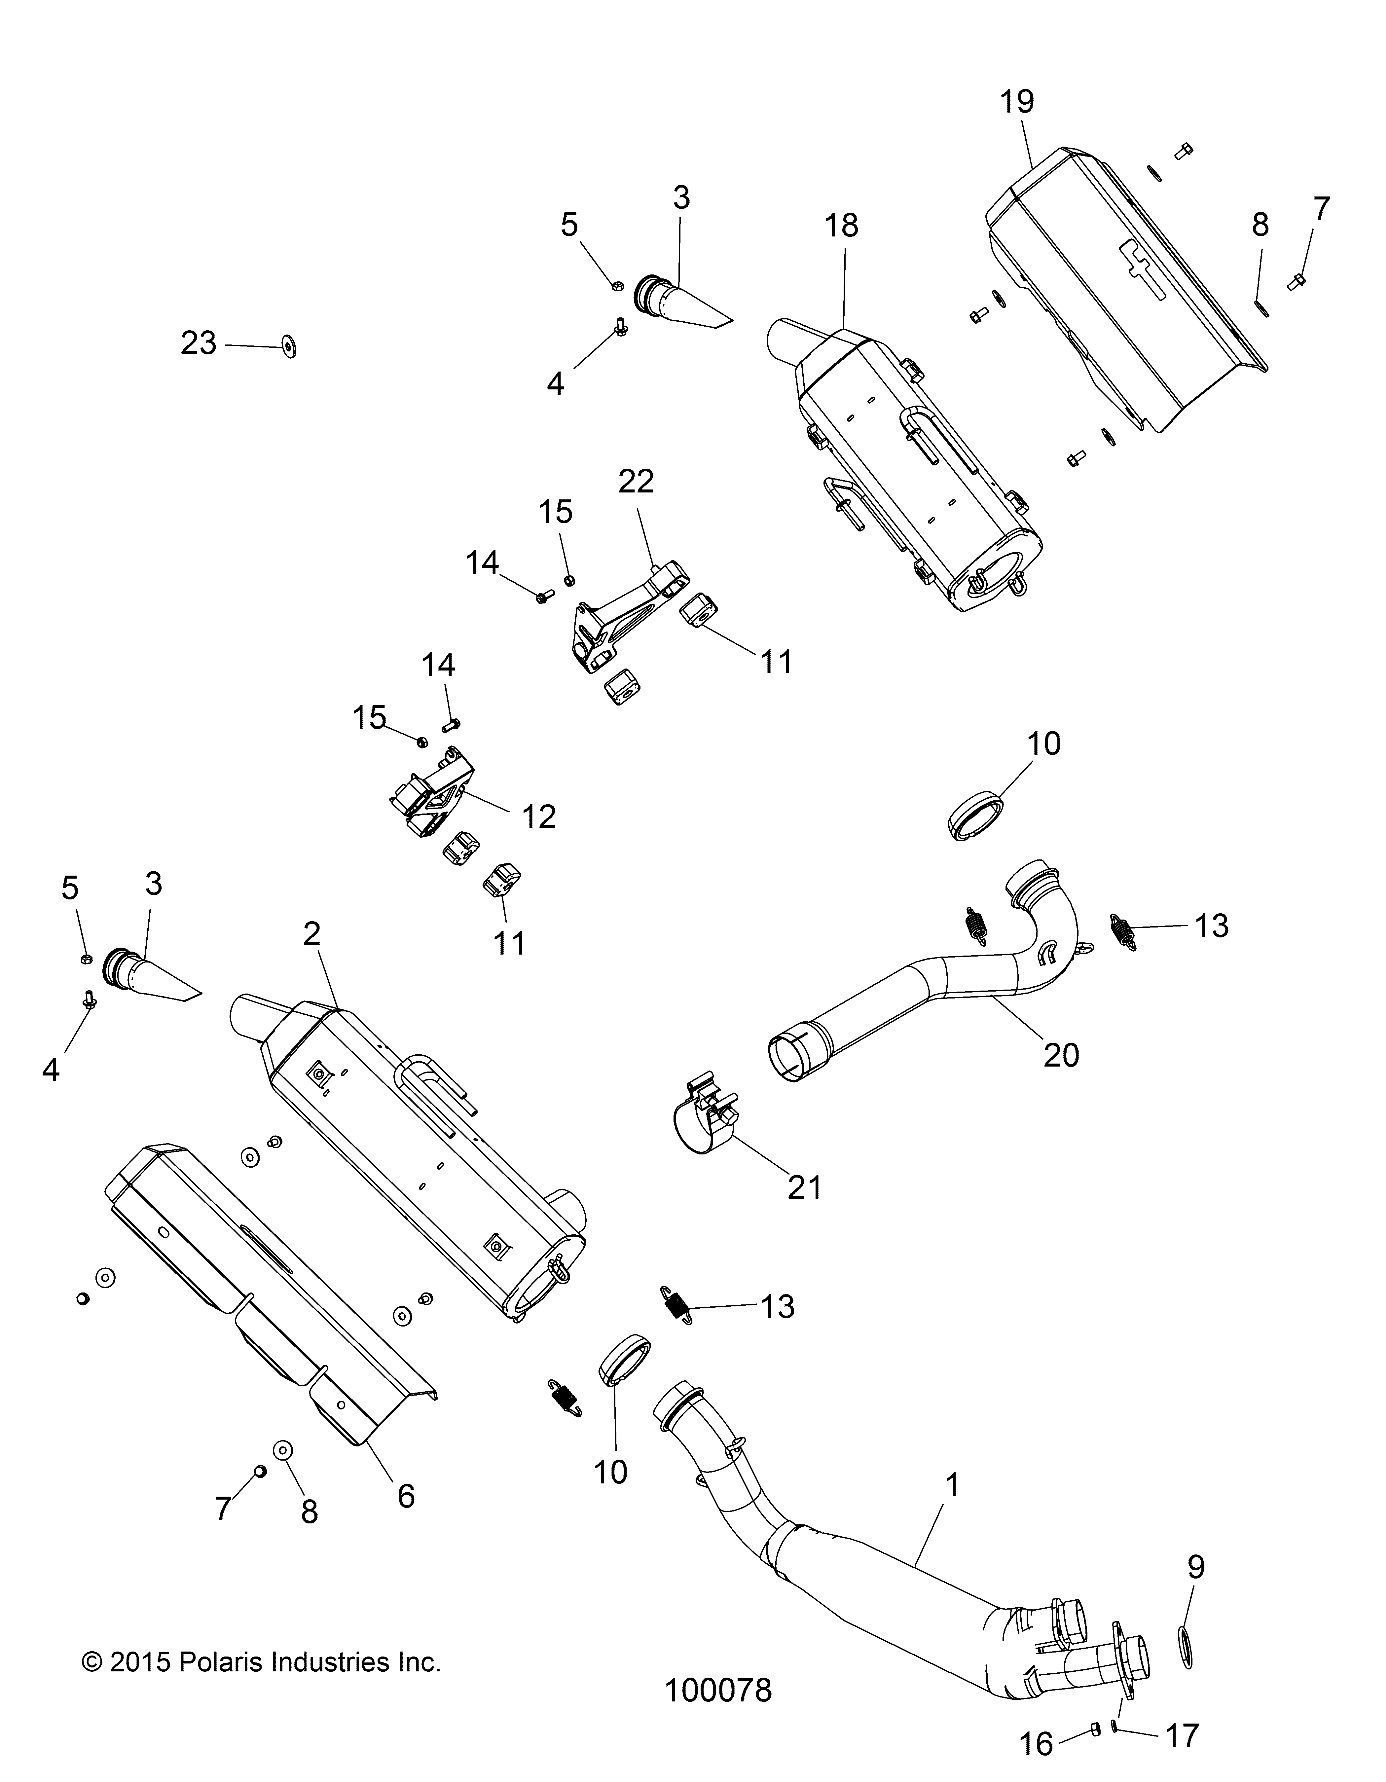 Part Number : 5259369 SHIELD-EXHAUST PRIMARY FRNT ML